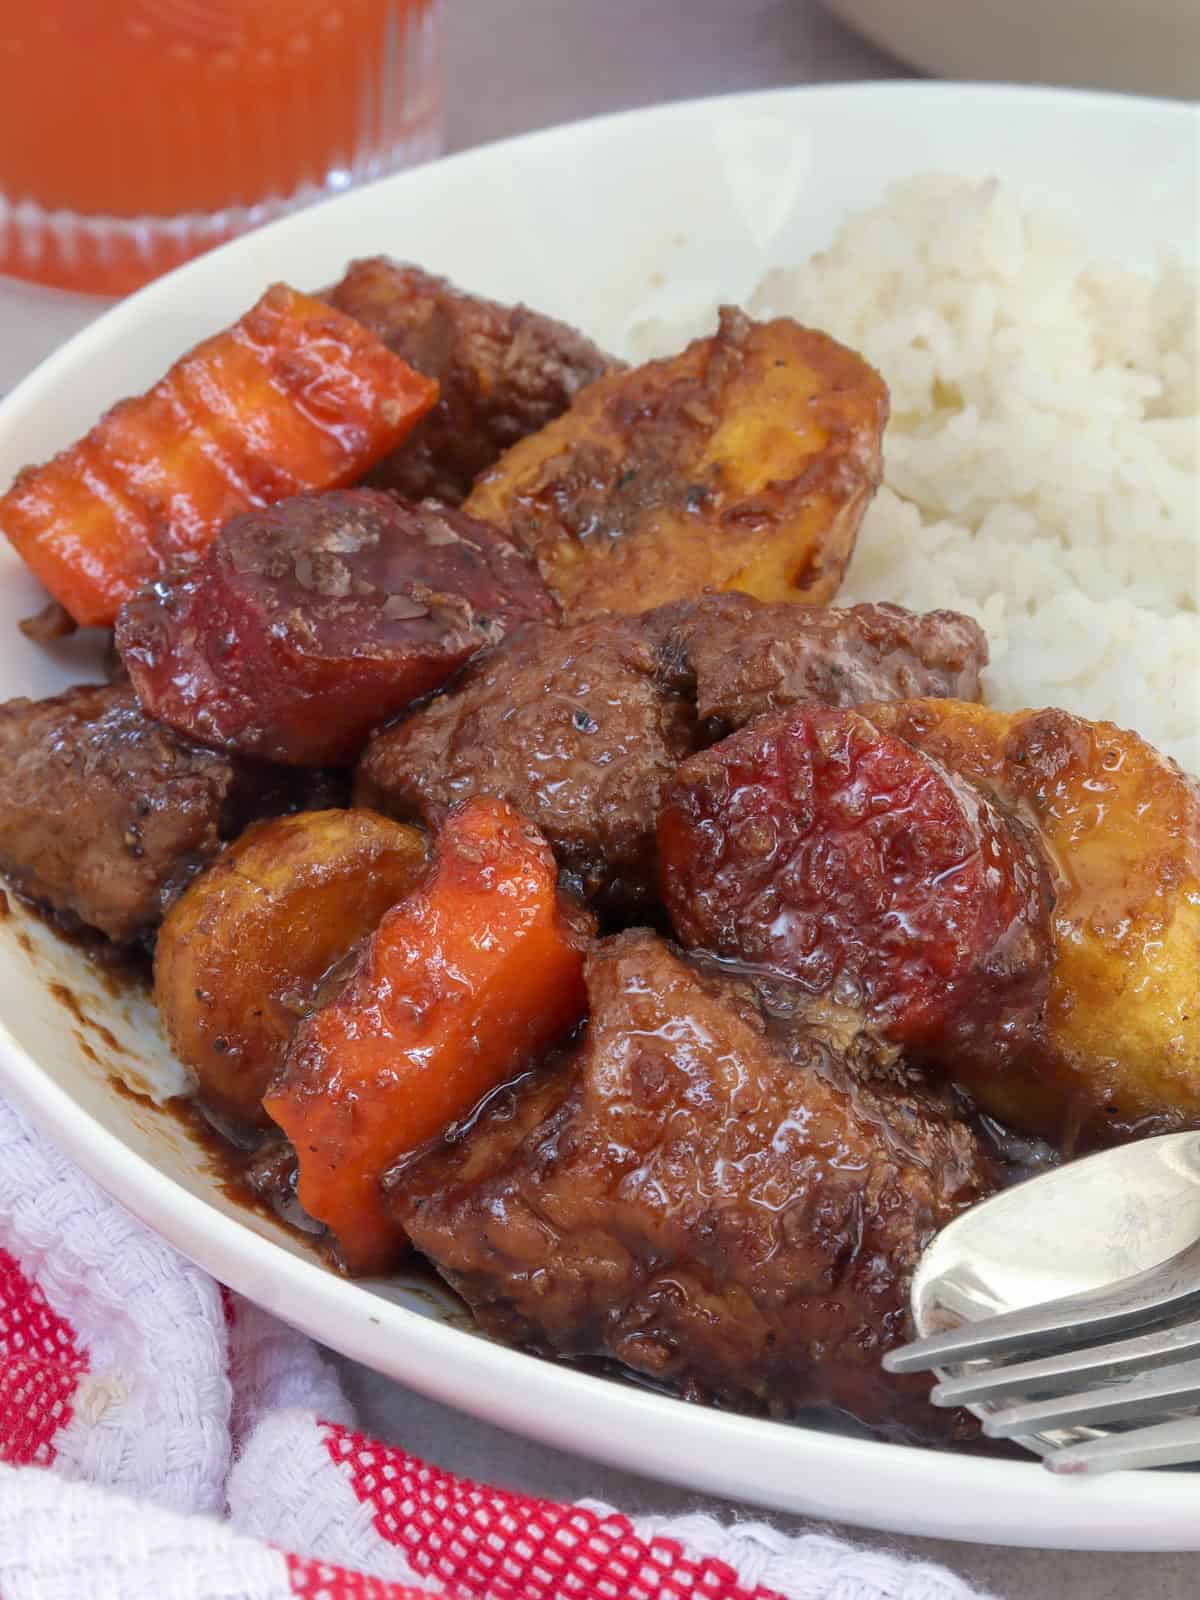 estofadong baboy on a plate with steamed rice